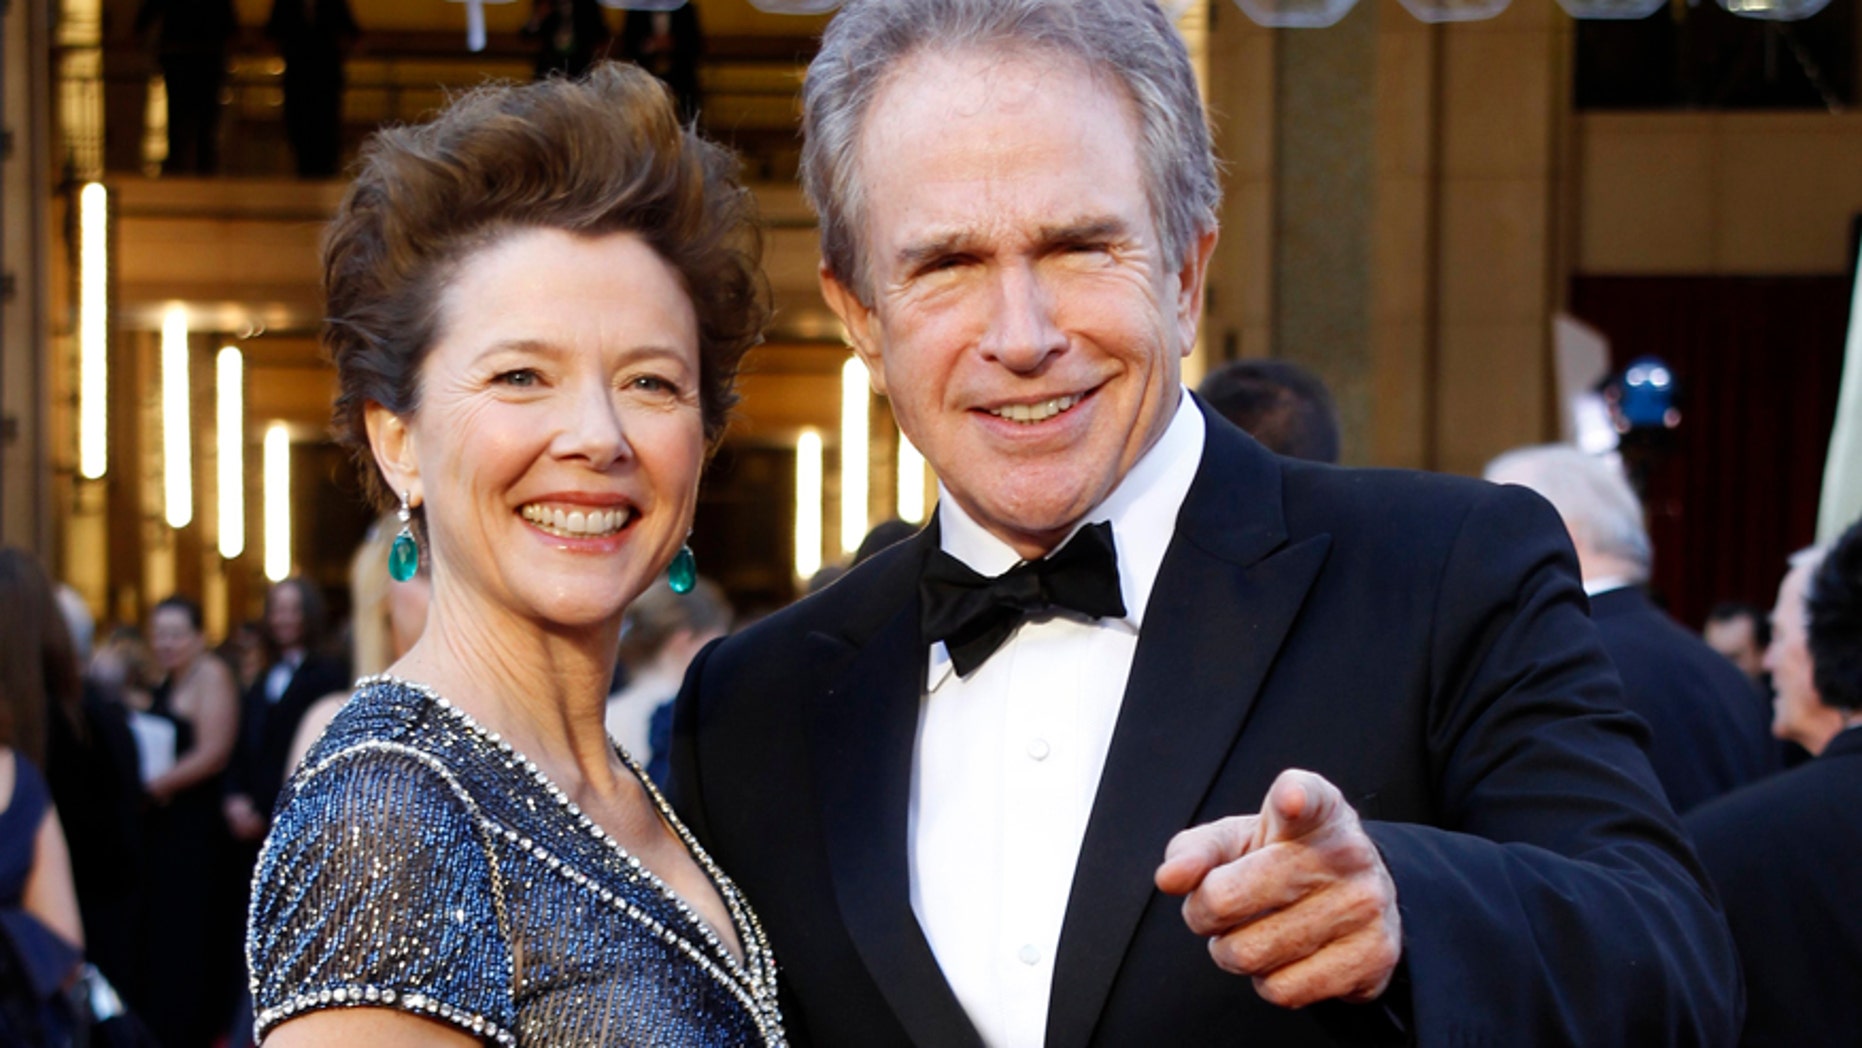 Annette Bening and husband Warren Beatty arrive at the 83rd Academy Awards in Hollywood, California, February 27, 2011.